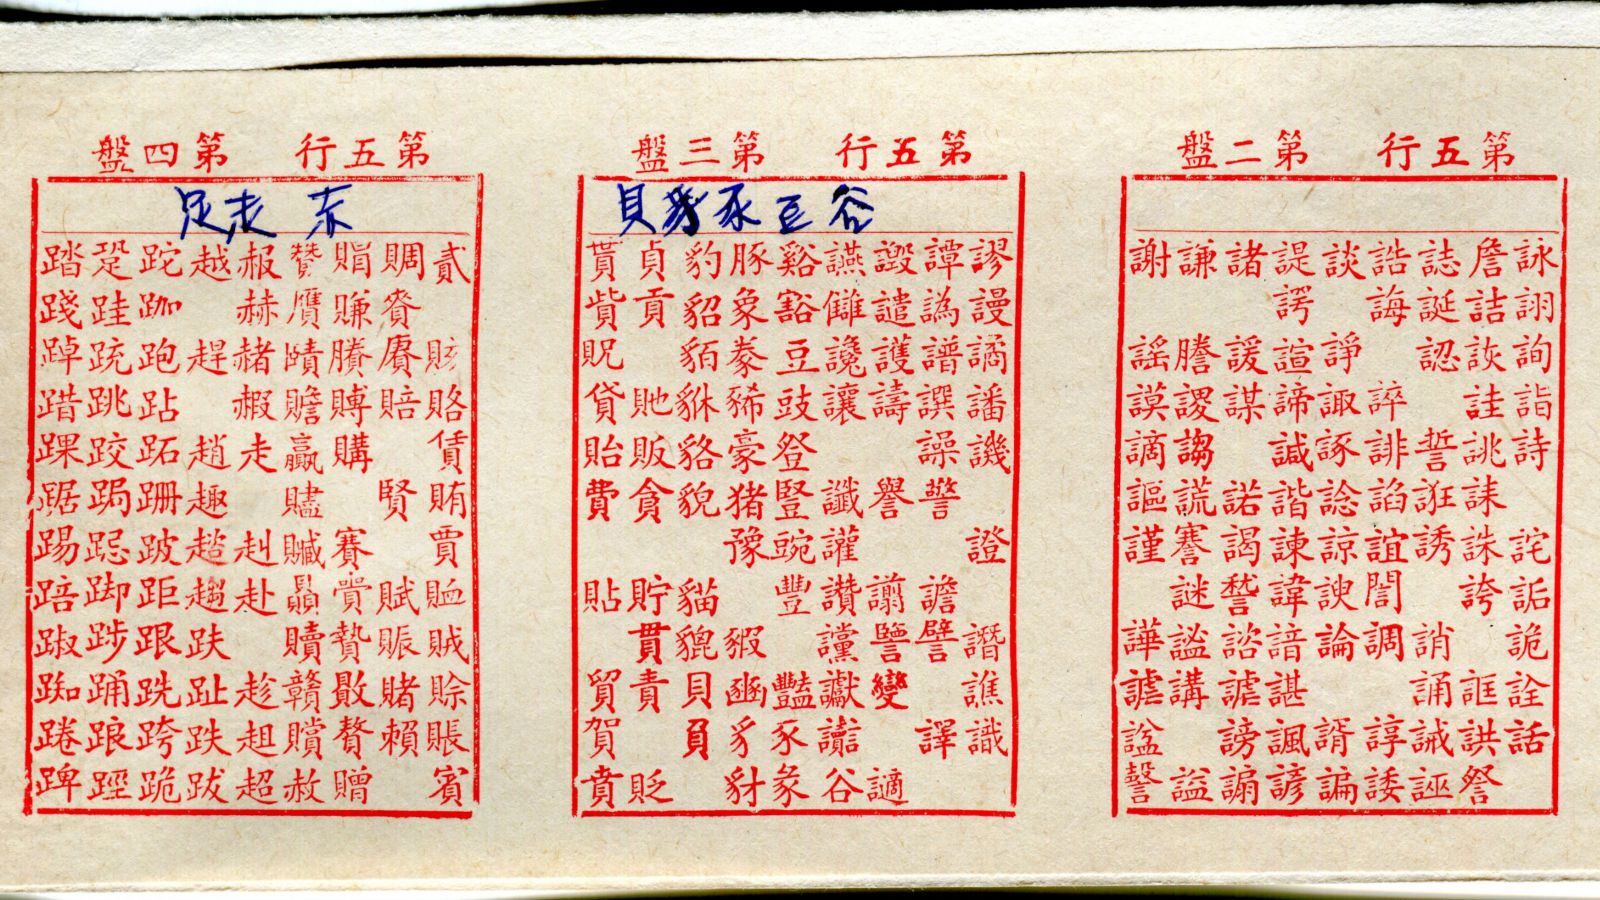 A sample page from a Shanghai-style typecase layout manual